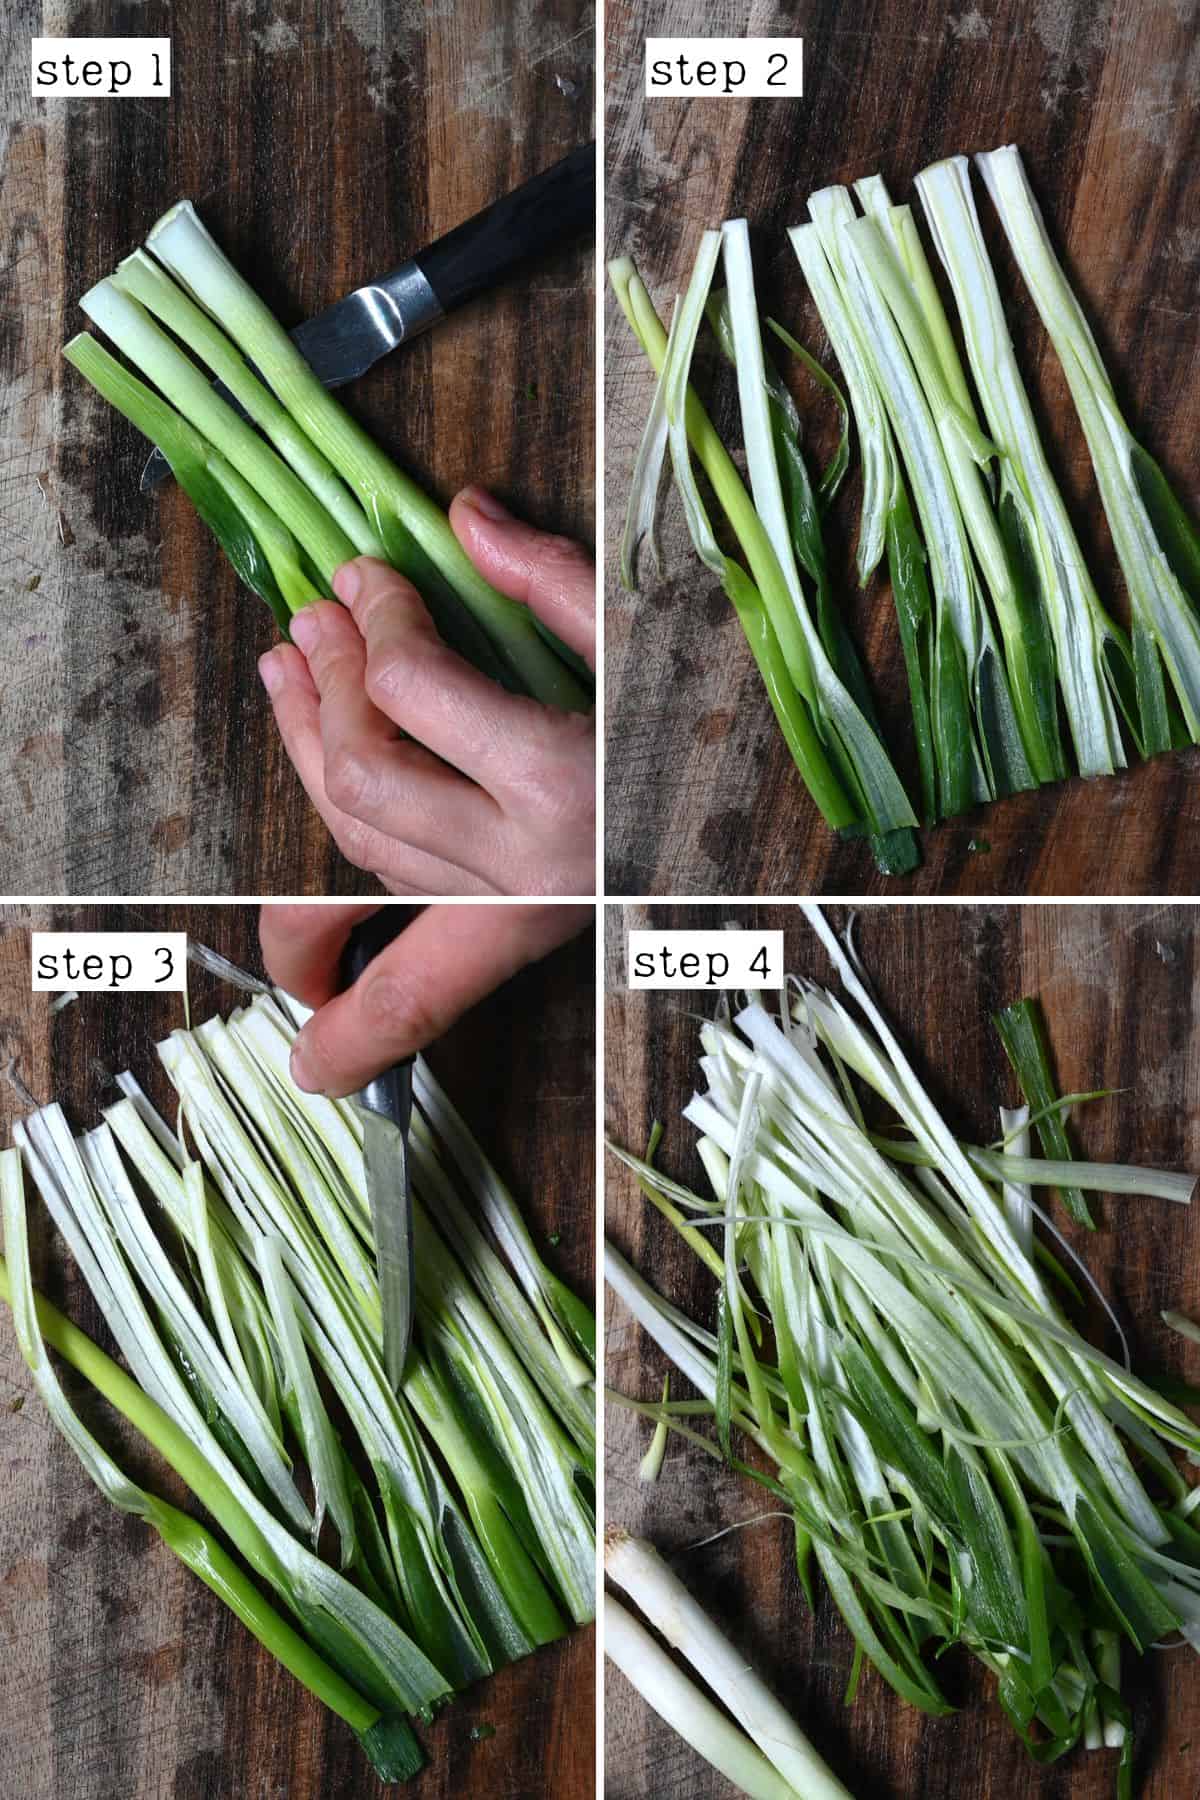 Steps for cutting thin strips of green onions